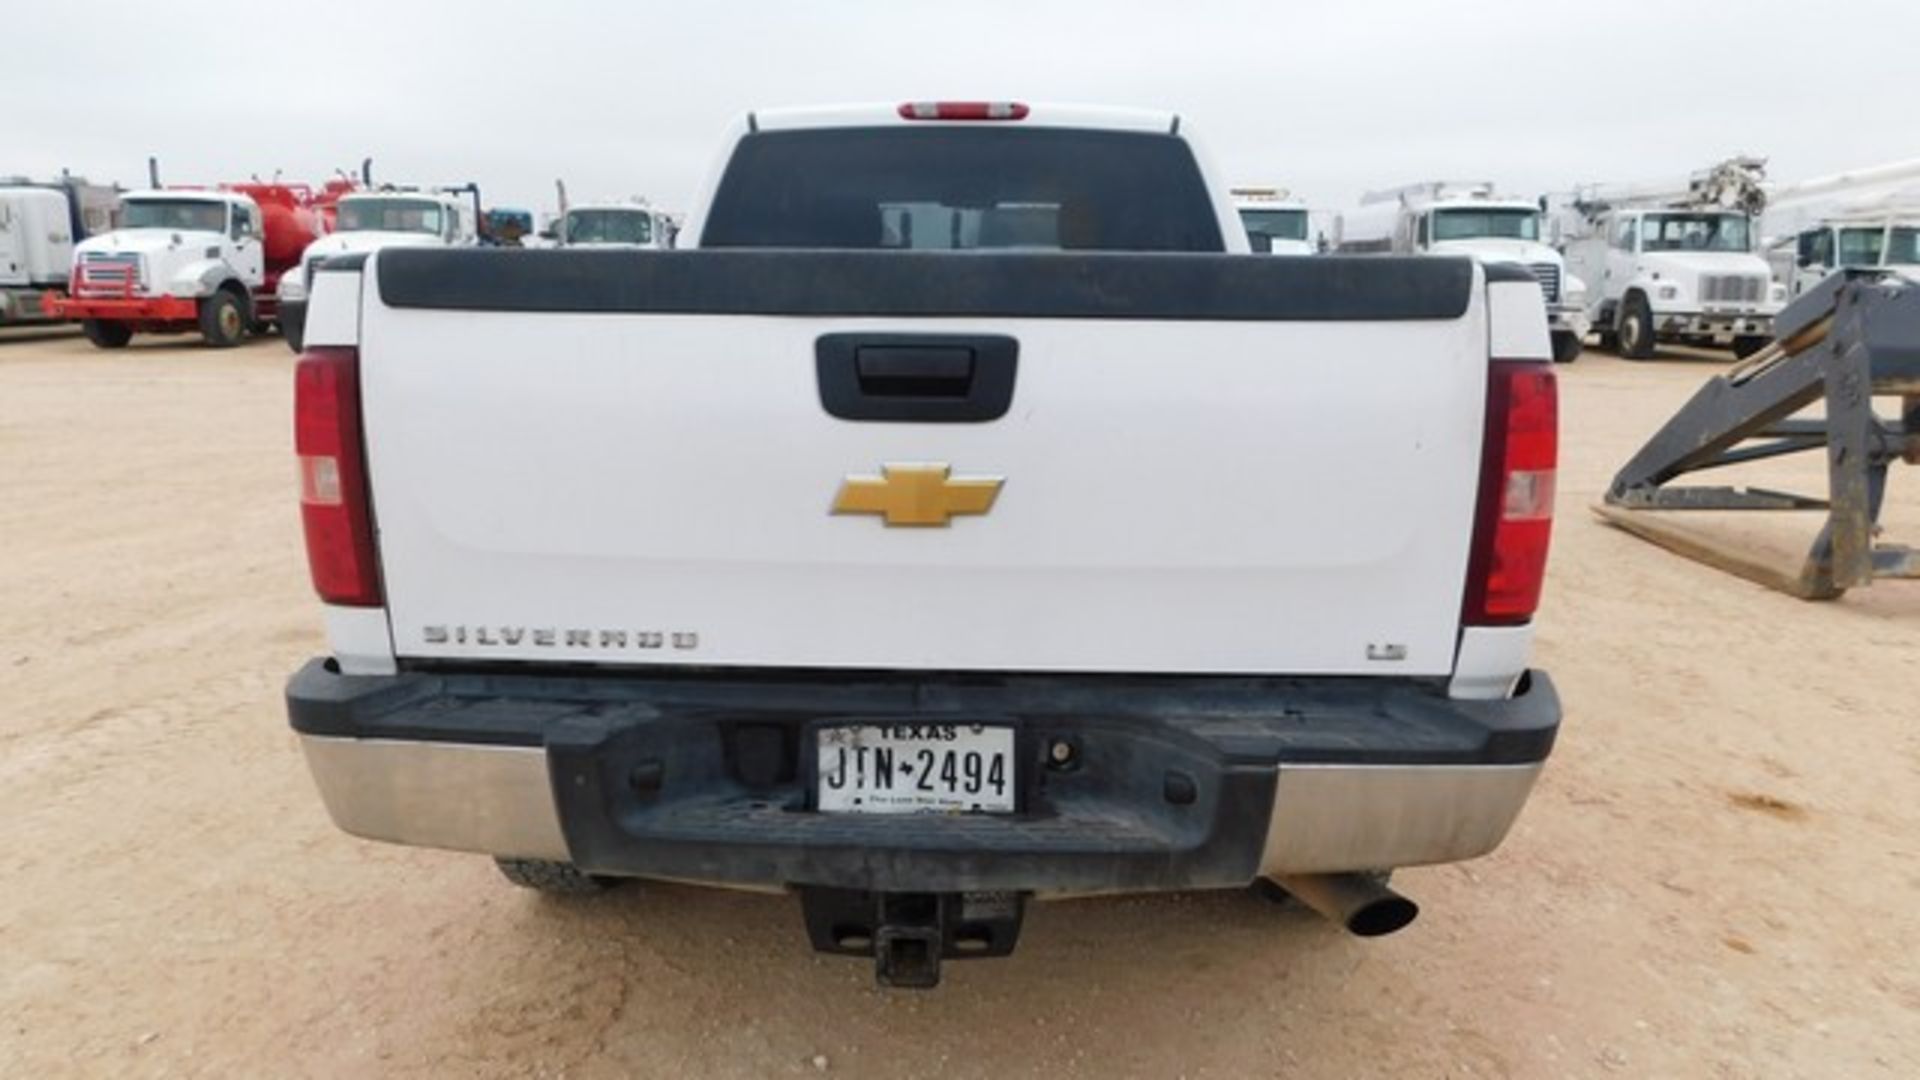 Located in YARD 1 - Midland, TX (X) 2013 CHEVROLET 2500 HD EXT CAB PICK UP, P/B - Image 5 of 9